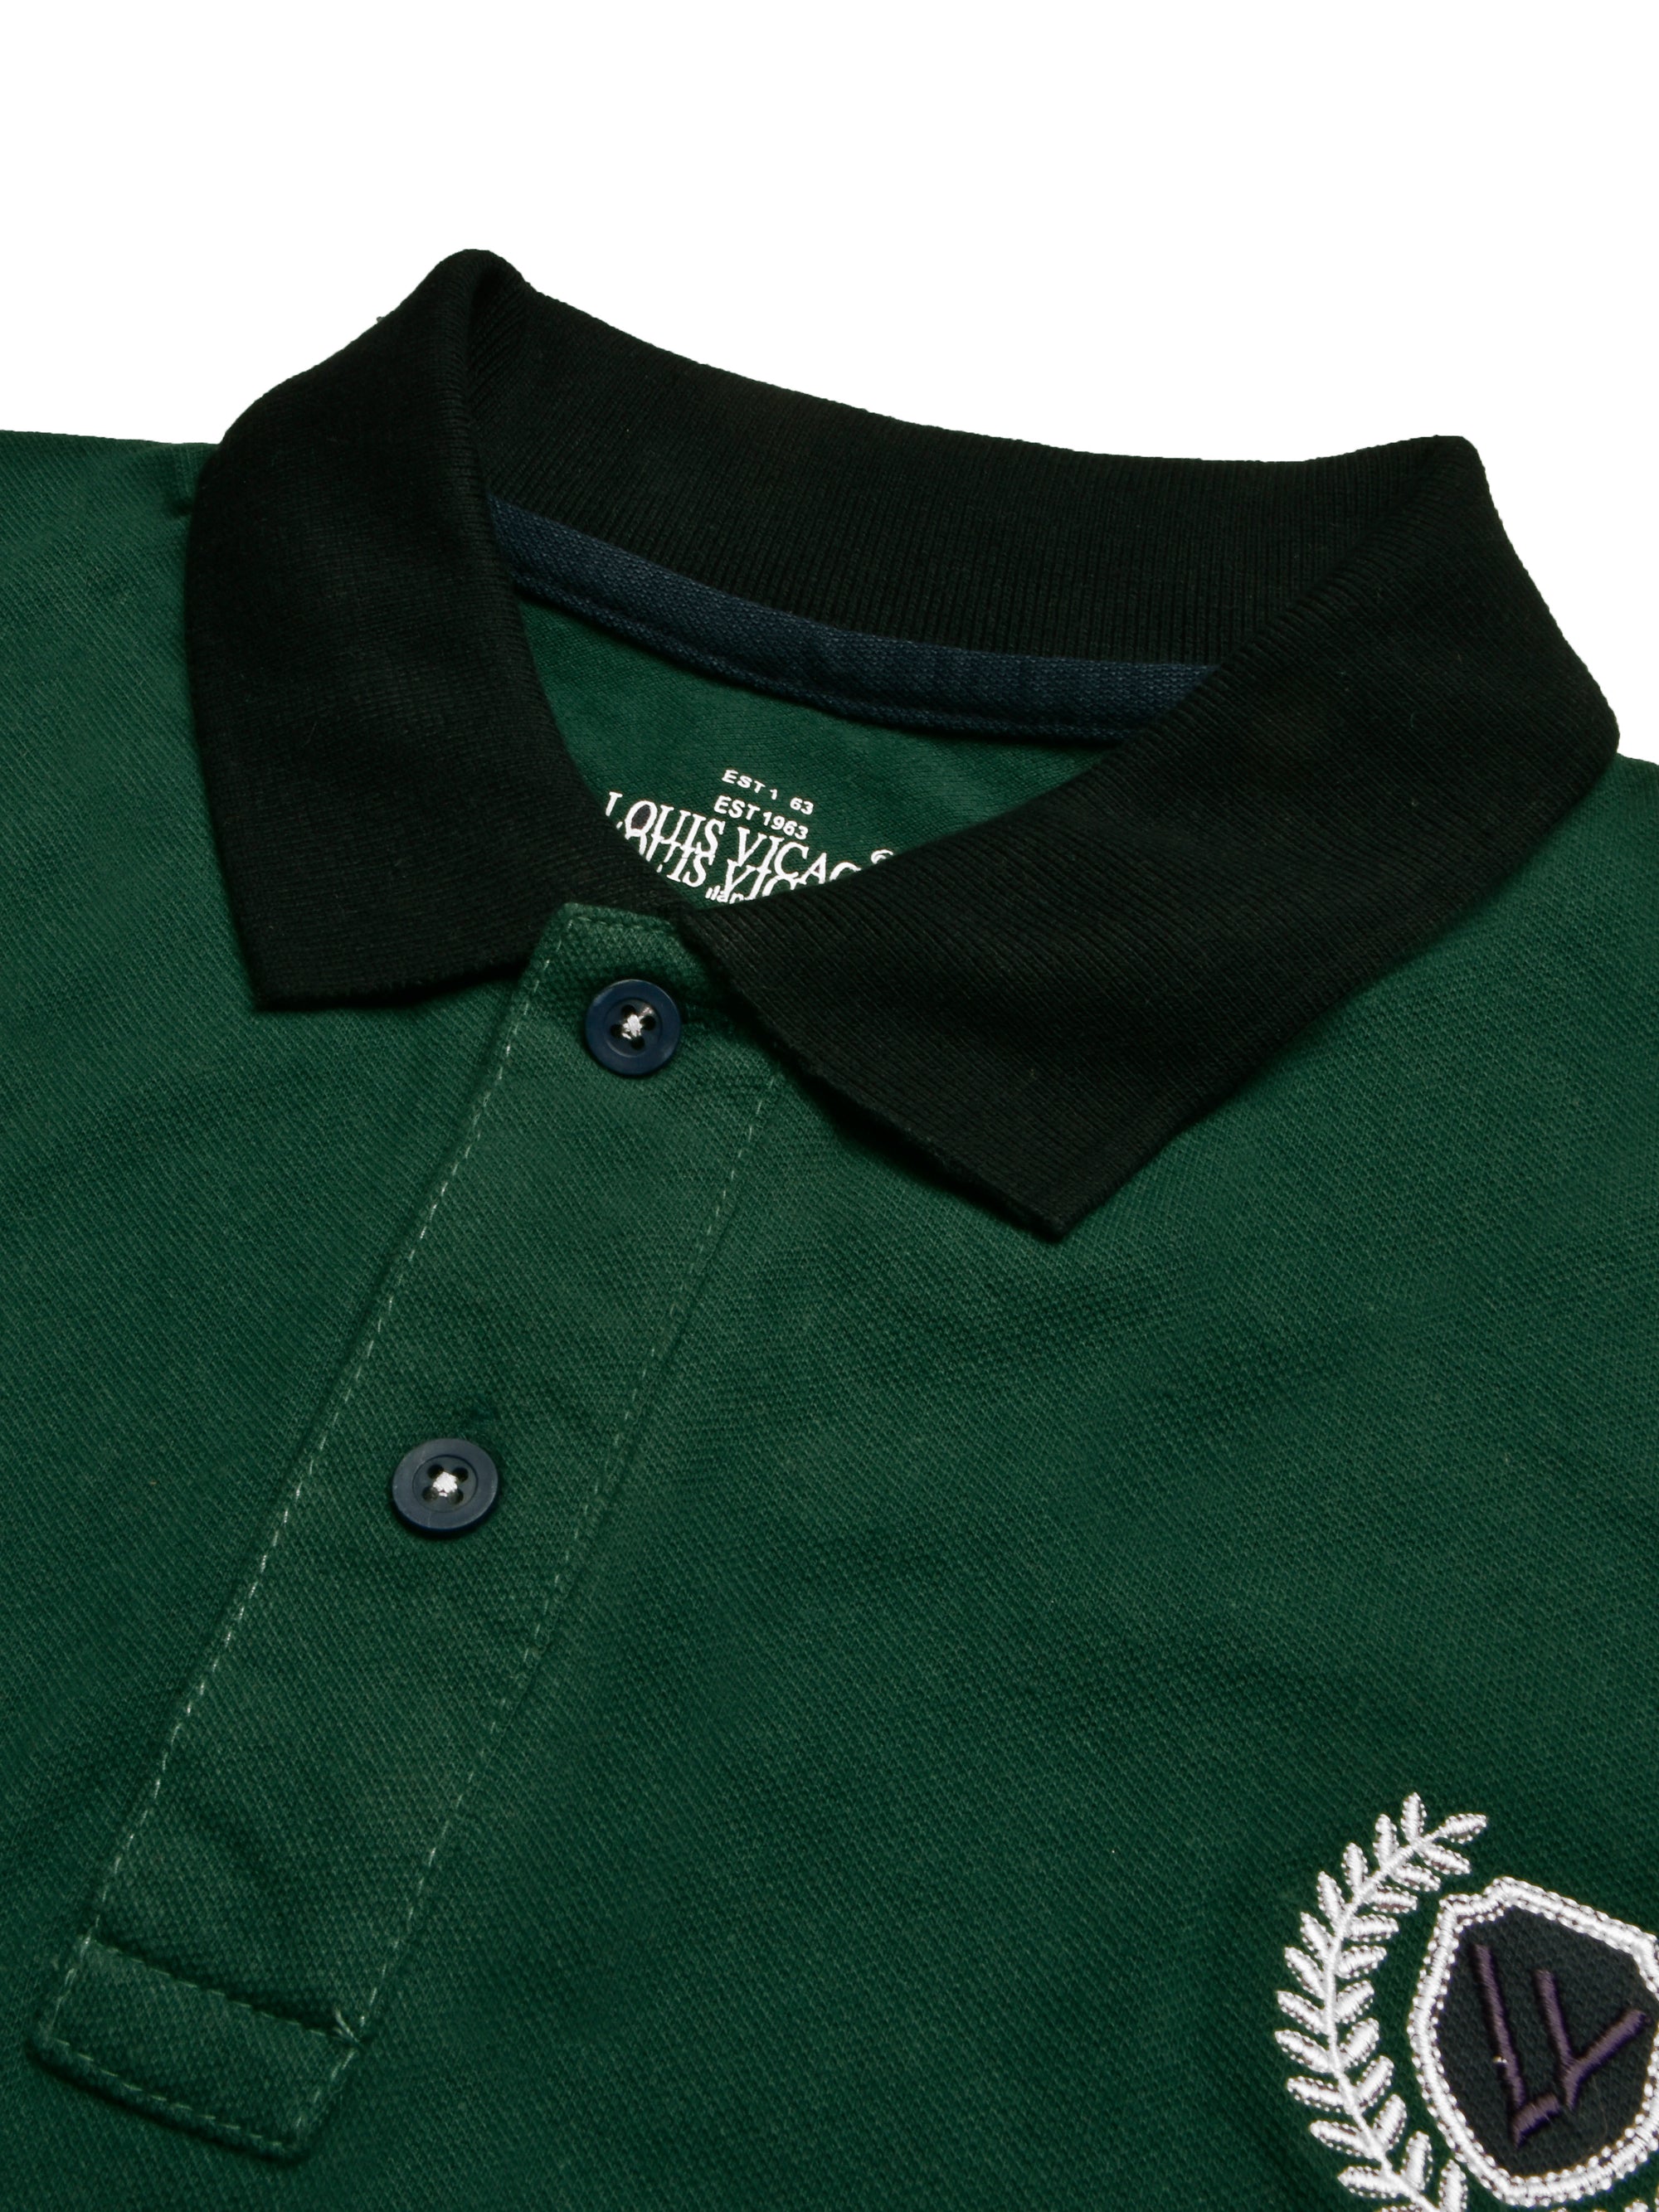 LV Summer Polo Shirt For Men- Dark Green with Navy-SP1505